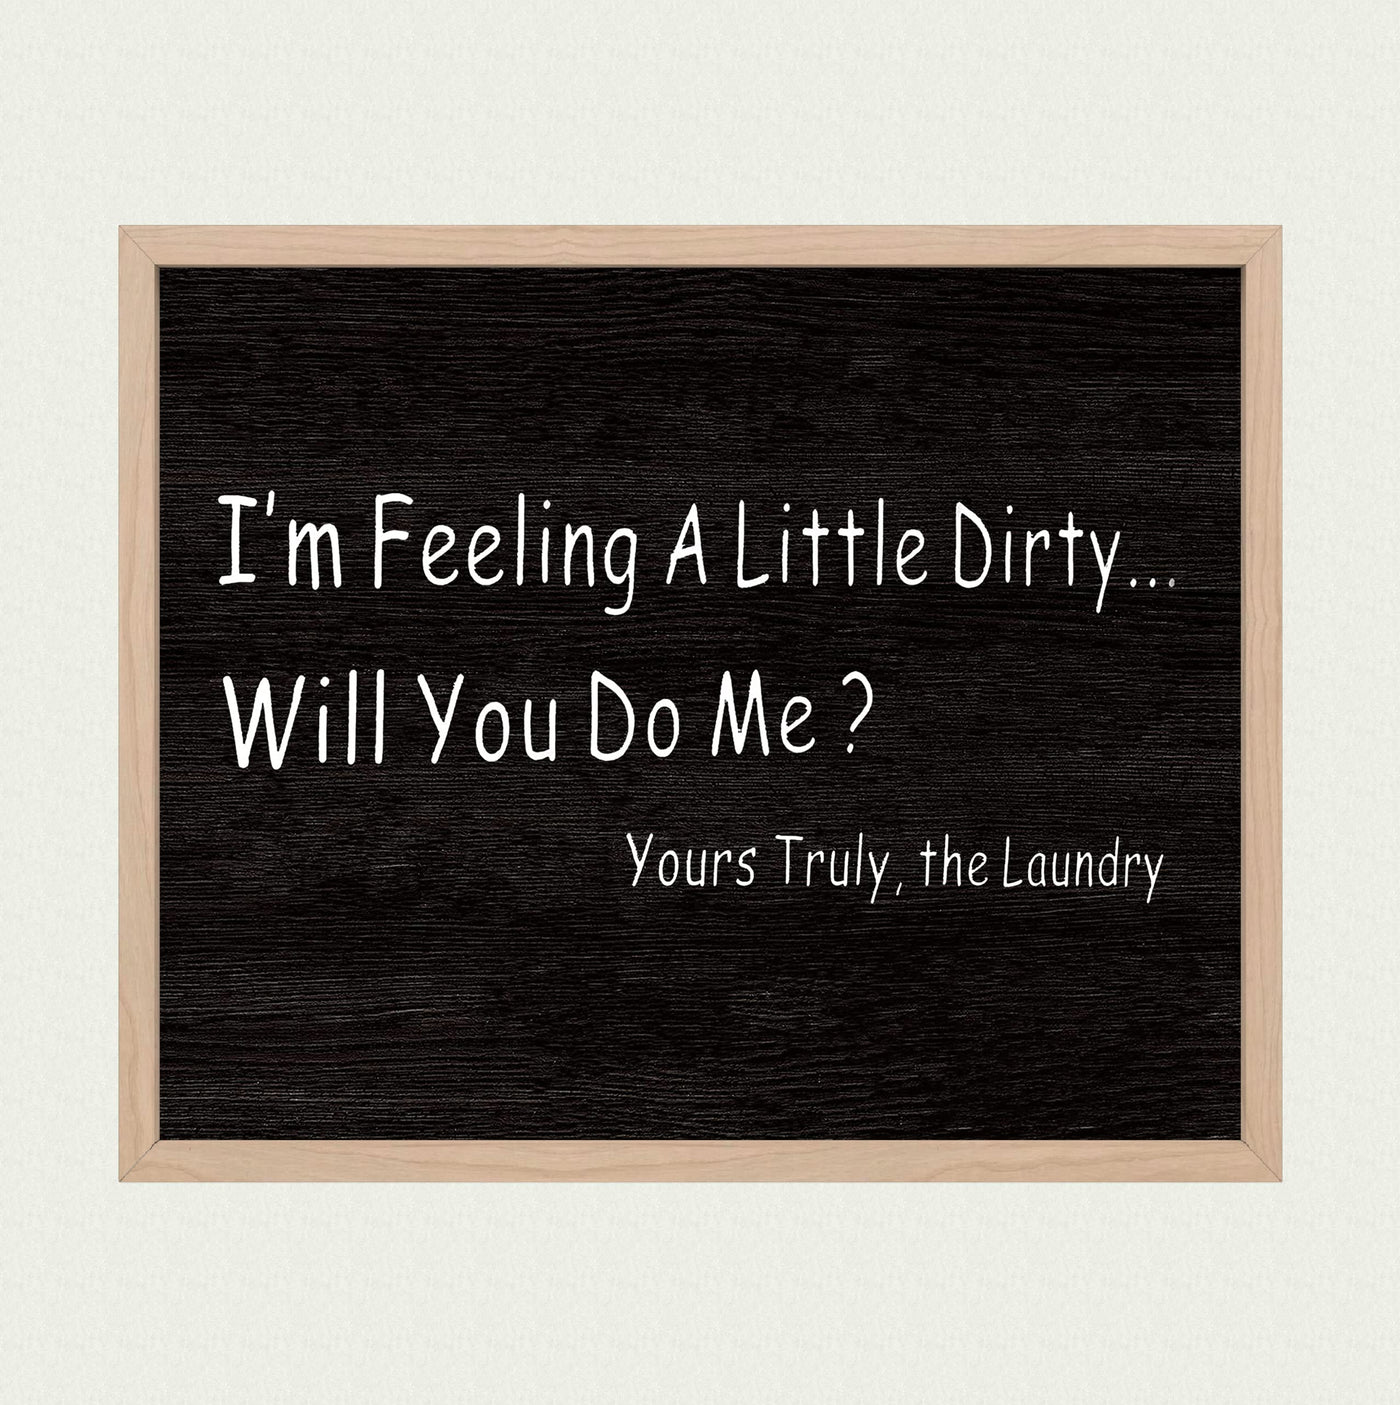 Feeling Dirty-Will You Do Me? -The Laundry-Funny Wall Art Decor -10 x 8" Vintage Replica Wood Design Photo Print-Ready to Frame. Home-Guest House-Accessories. Fun Sign to Inspire Home Duties!